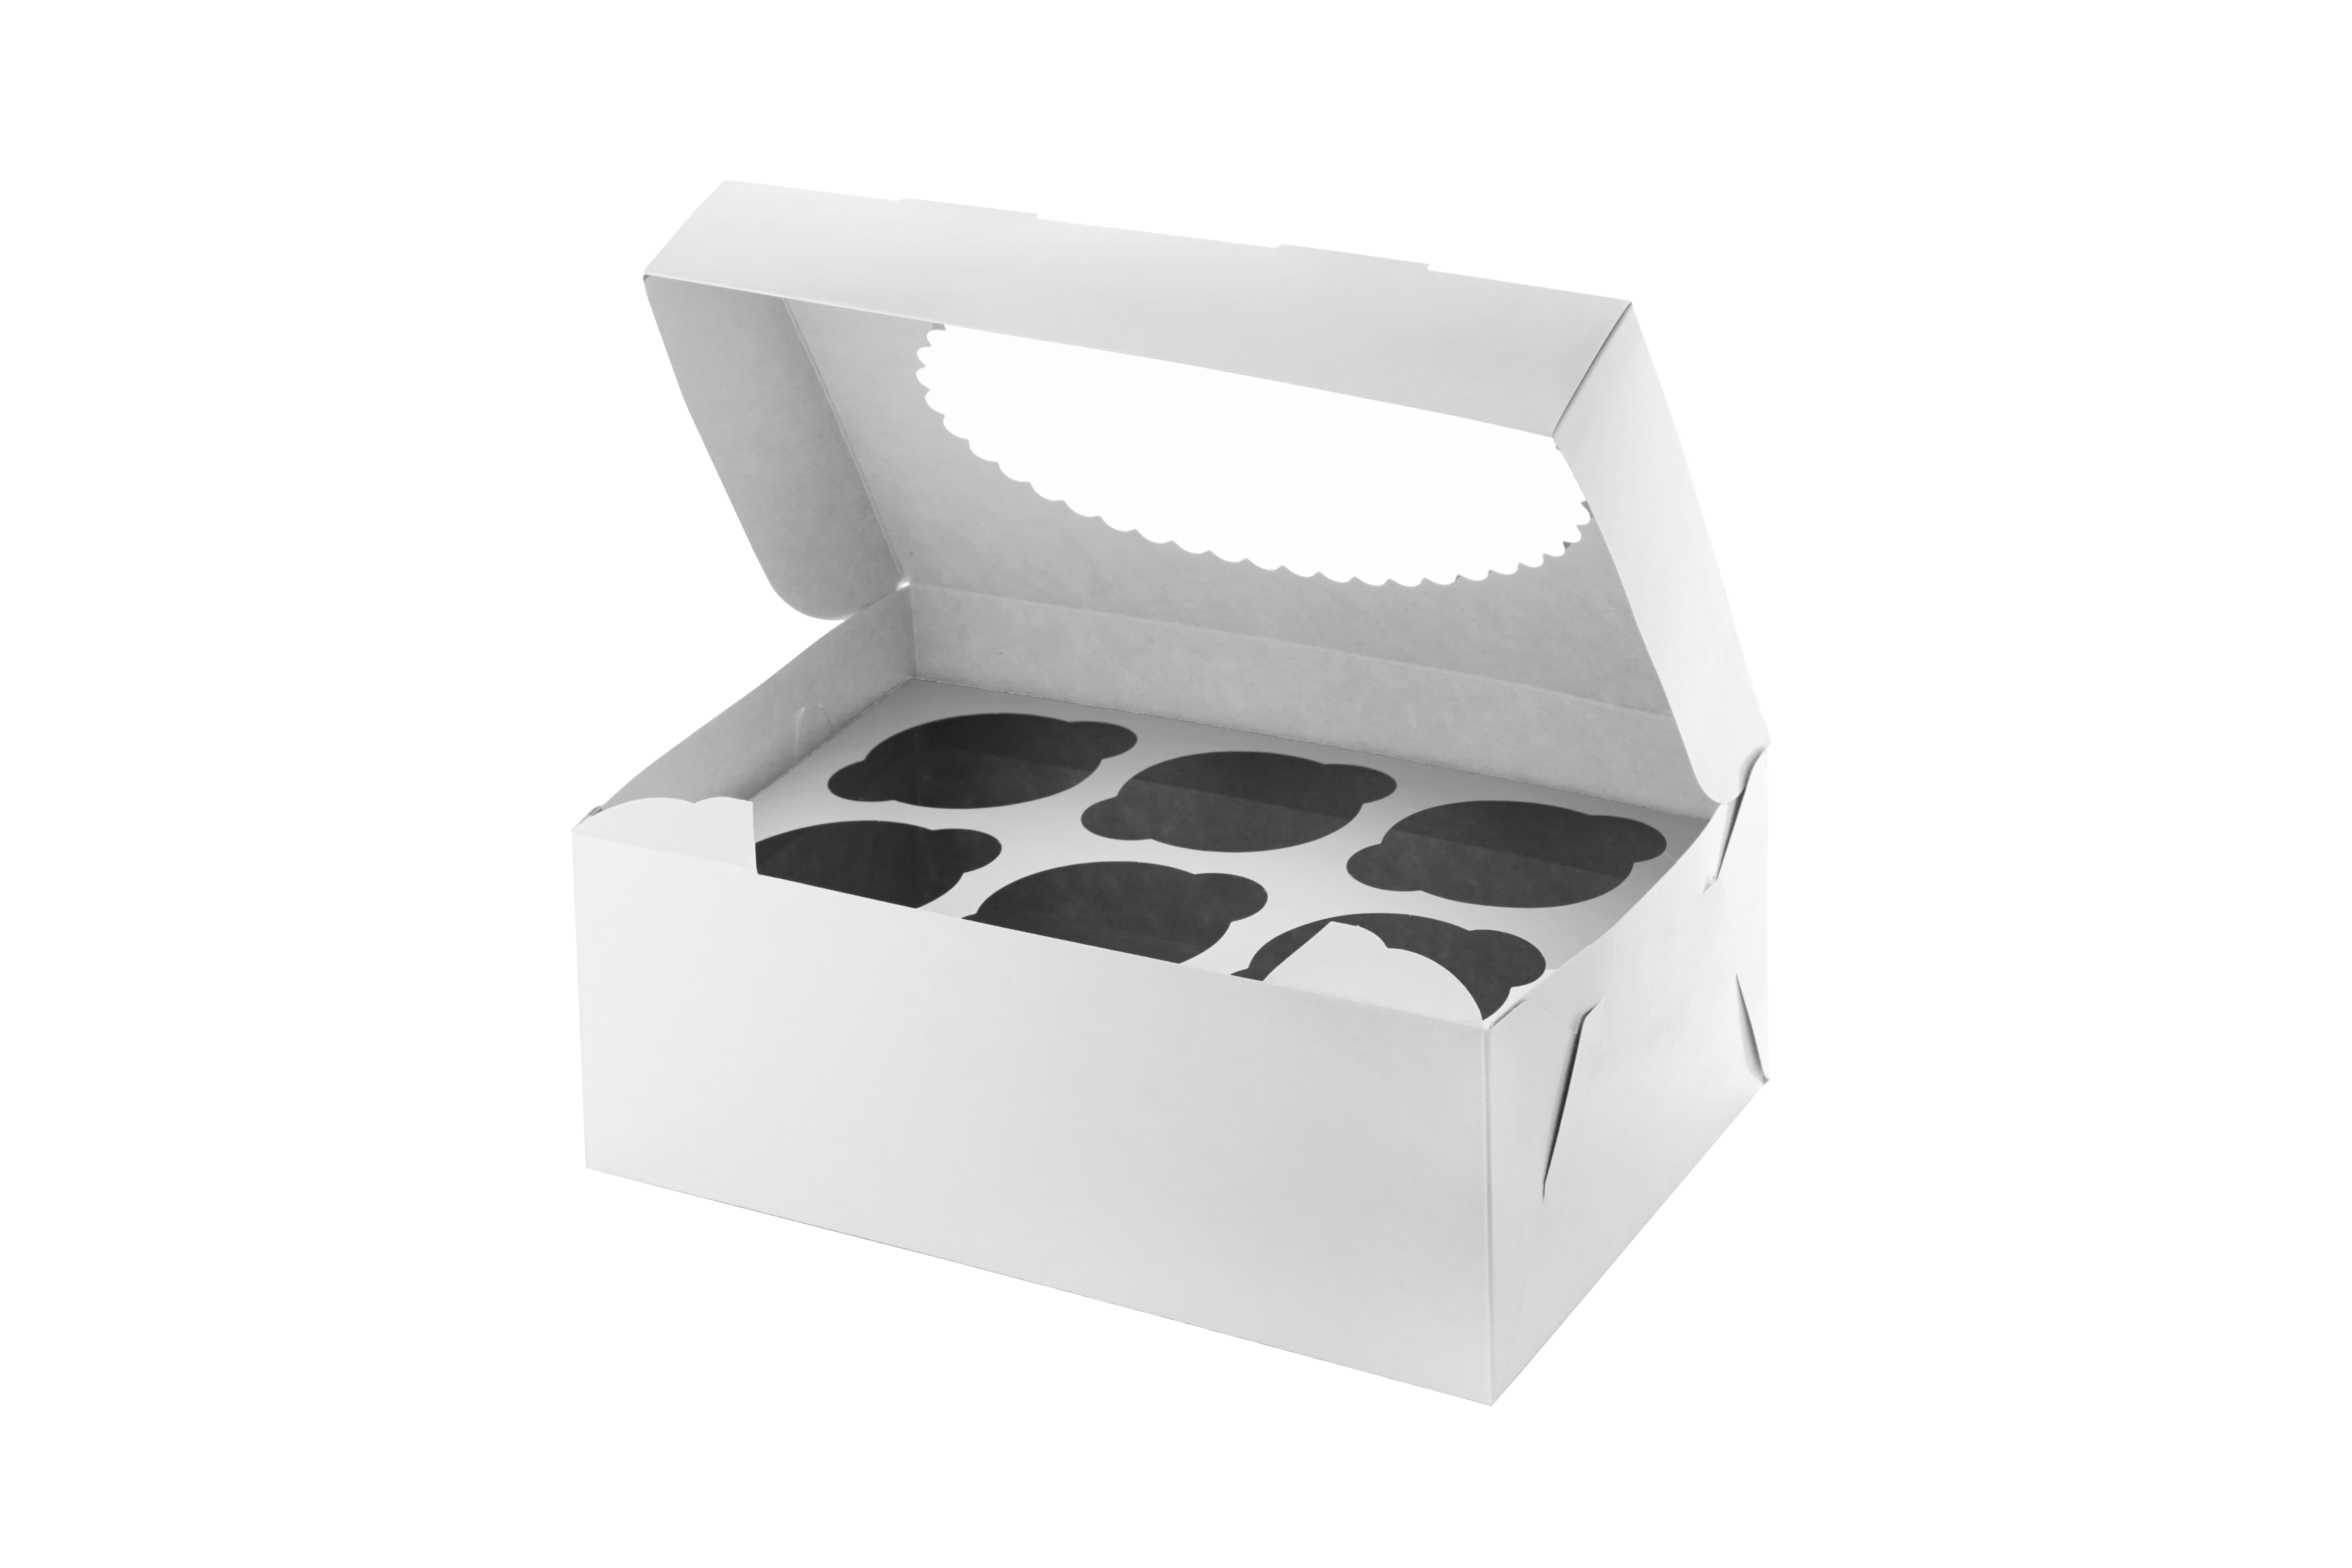 OSQ MUF 9 boxes for muffins